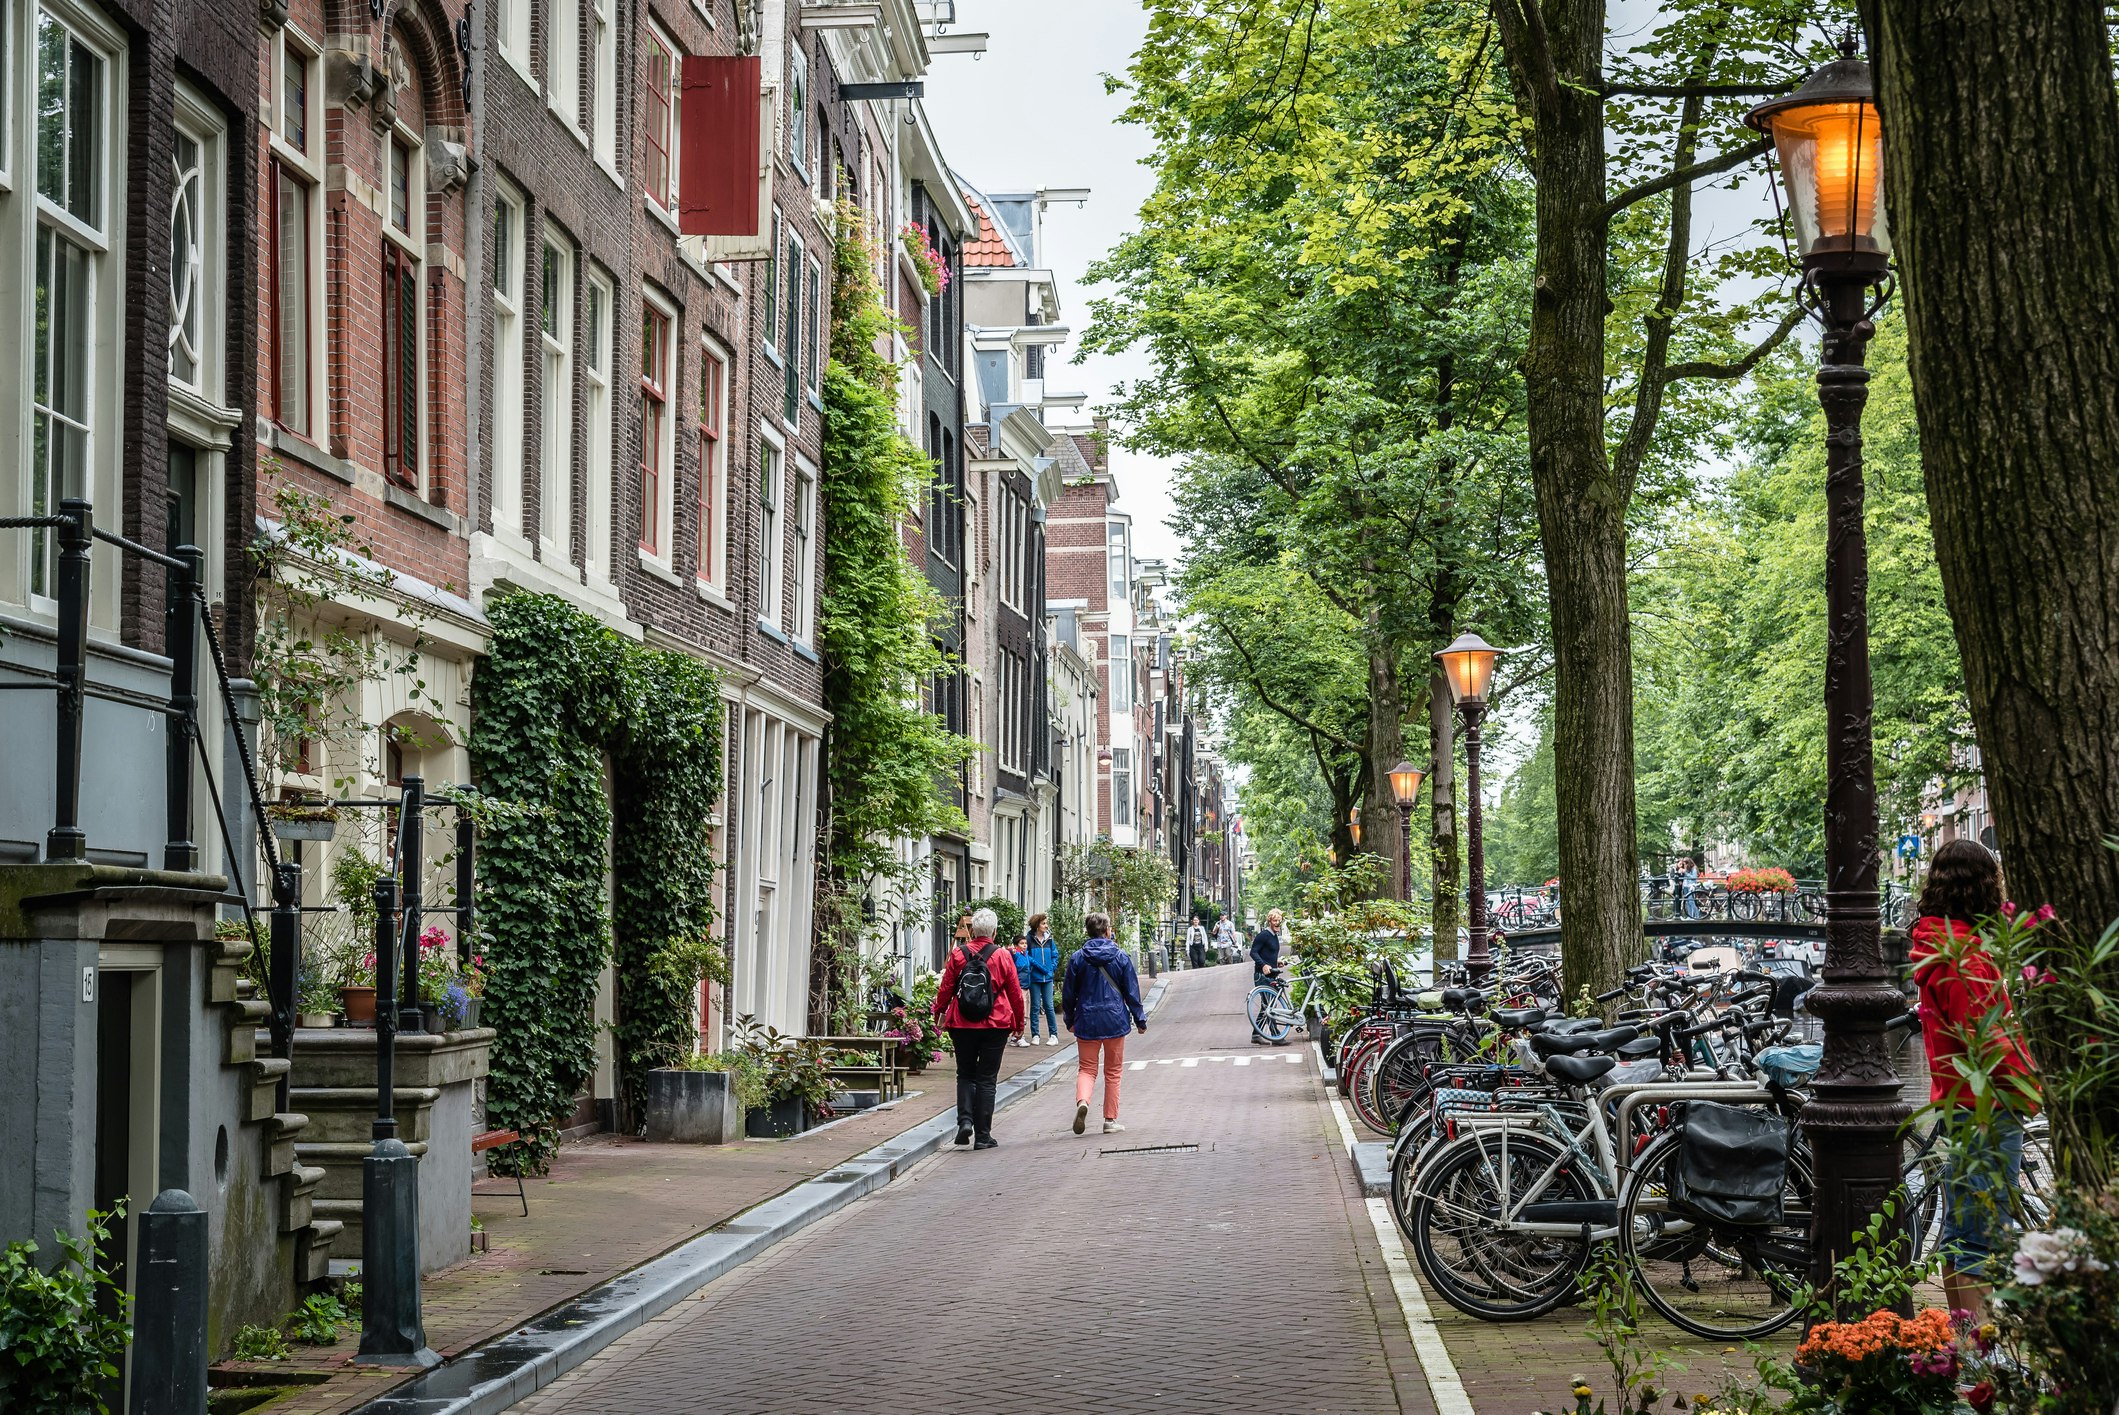 Rear View Of People Walking On Footpath By Typical Dutch Buildings